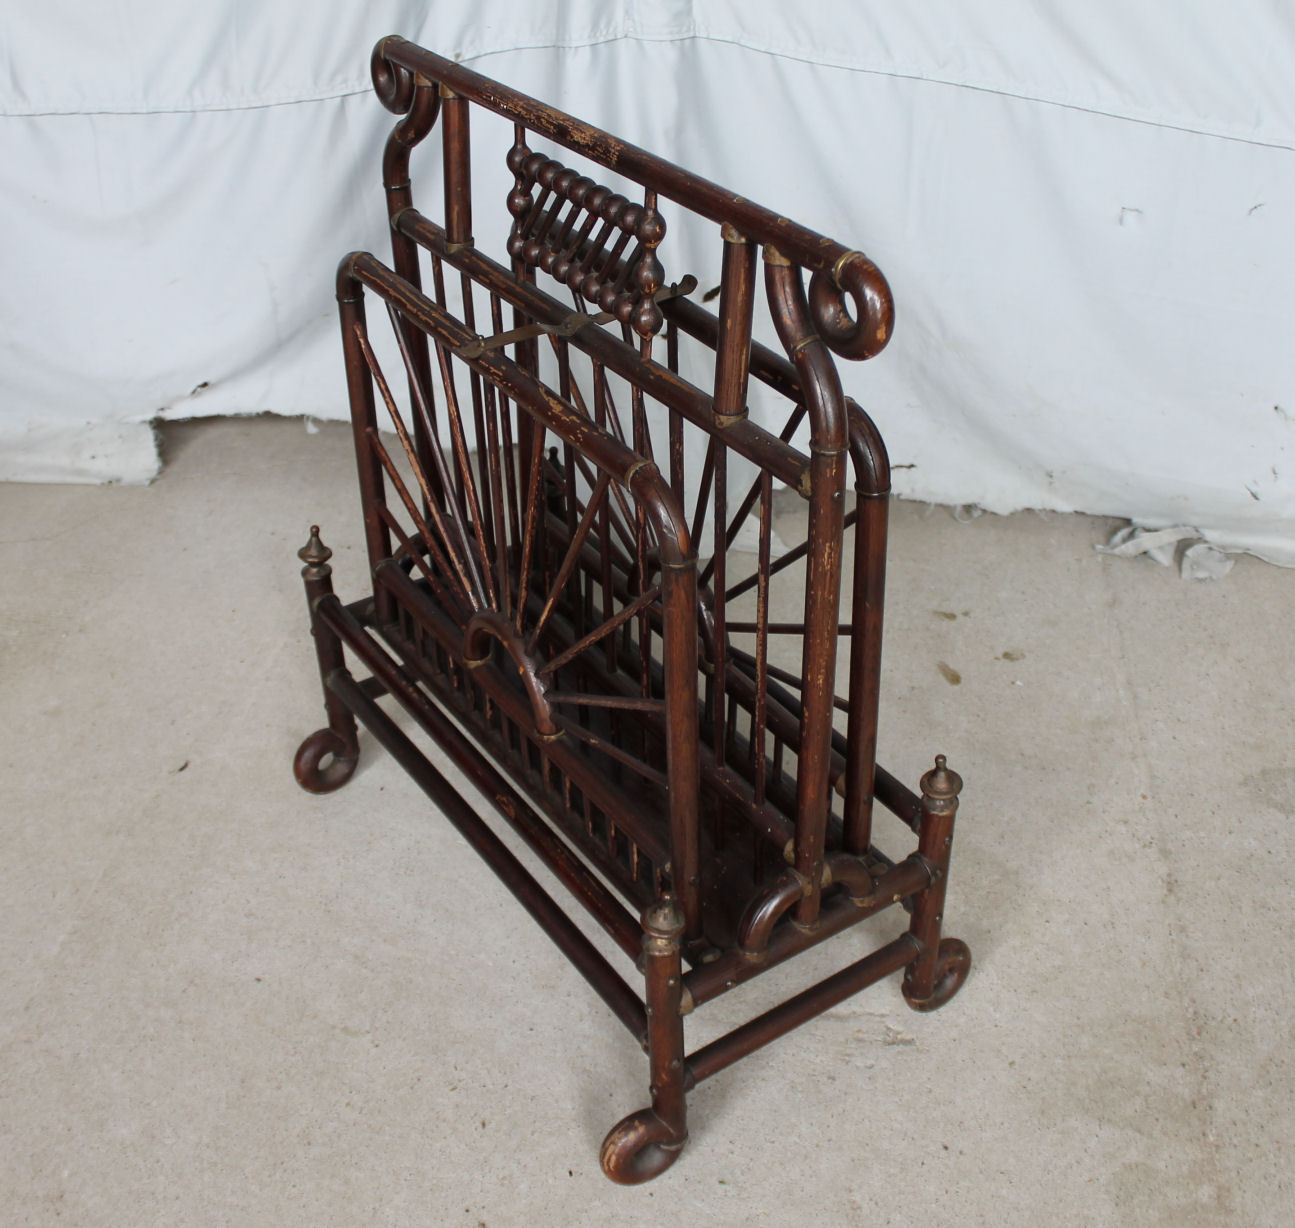 Bargain John's Antiques  Antique Stick and Ball Style Magazine Stand or Newspaper  Storage Rack - Bargain John's Antiques